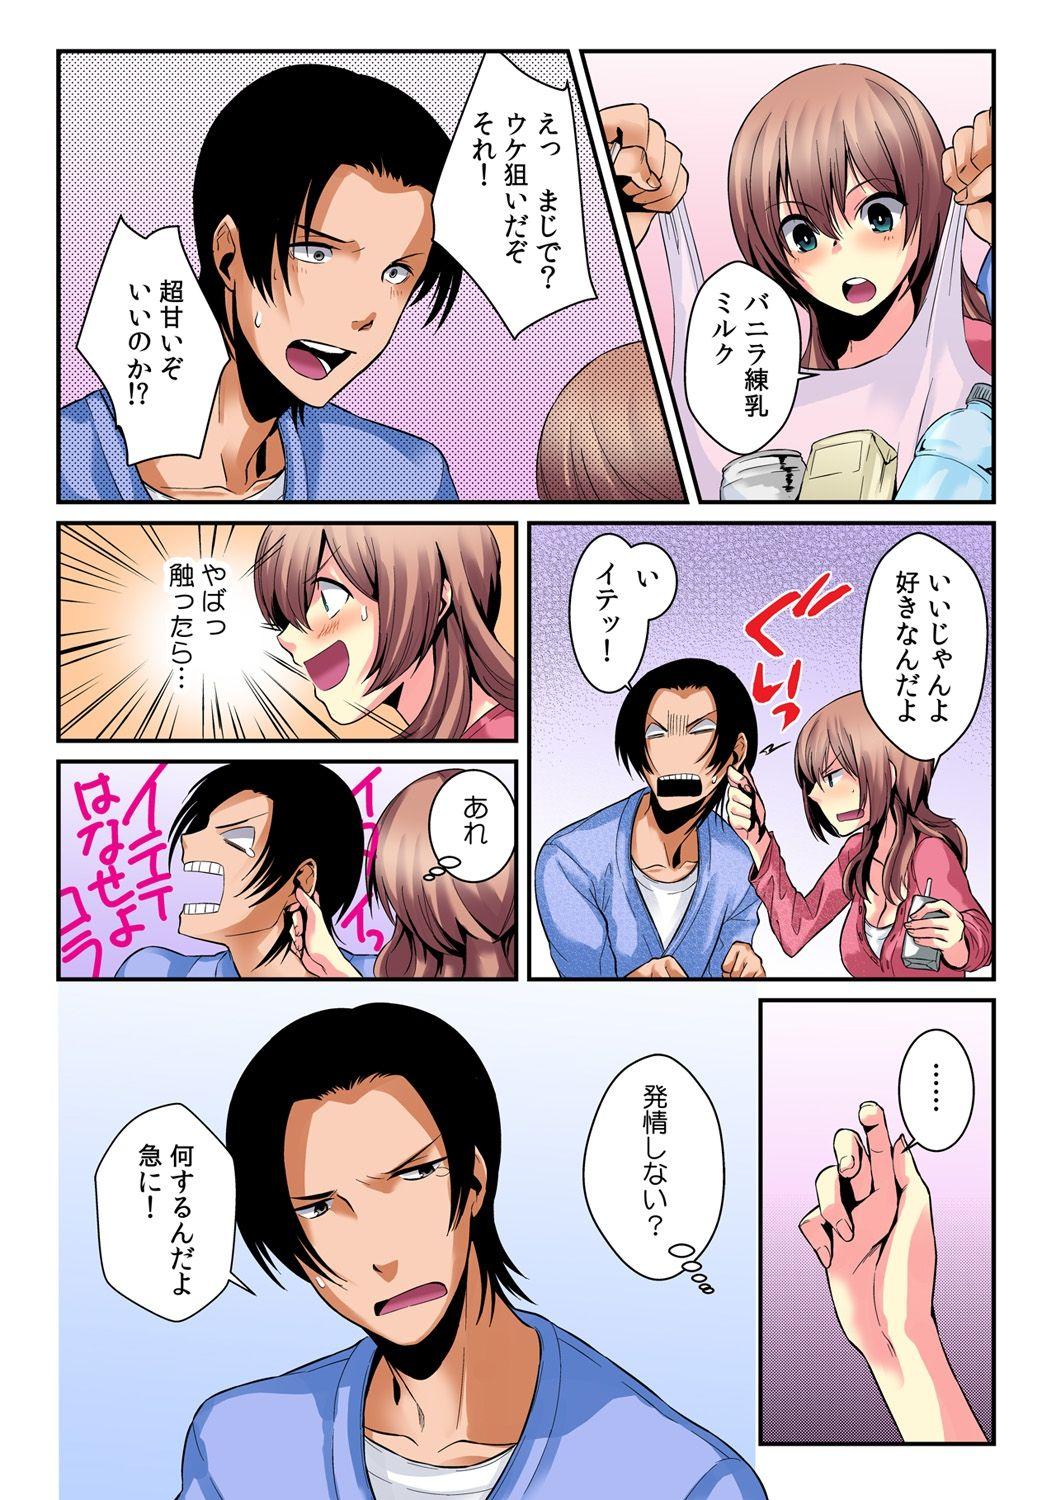 [Akagi Gijou / Akahige] I became a girl- and I definitely can't let anyone find out! (Full color) 2 9